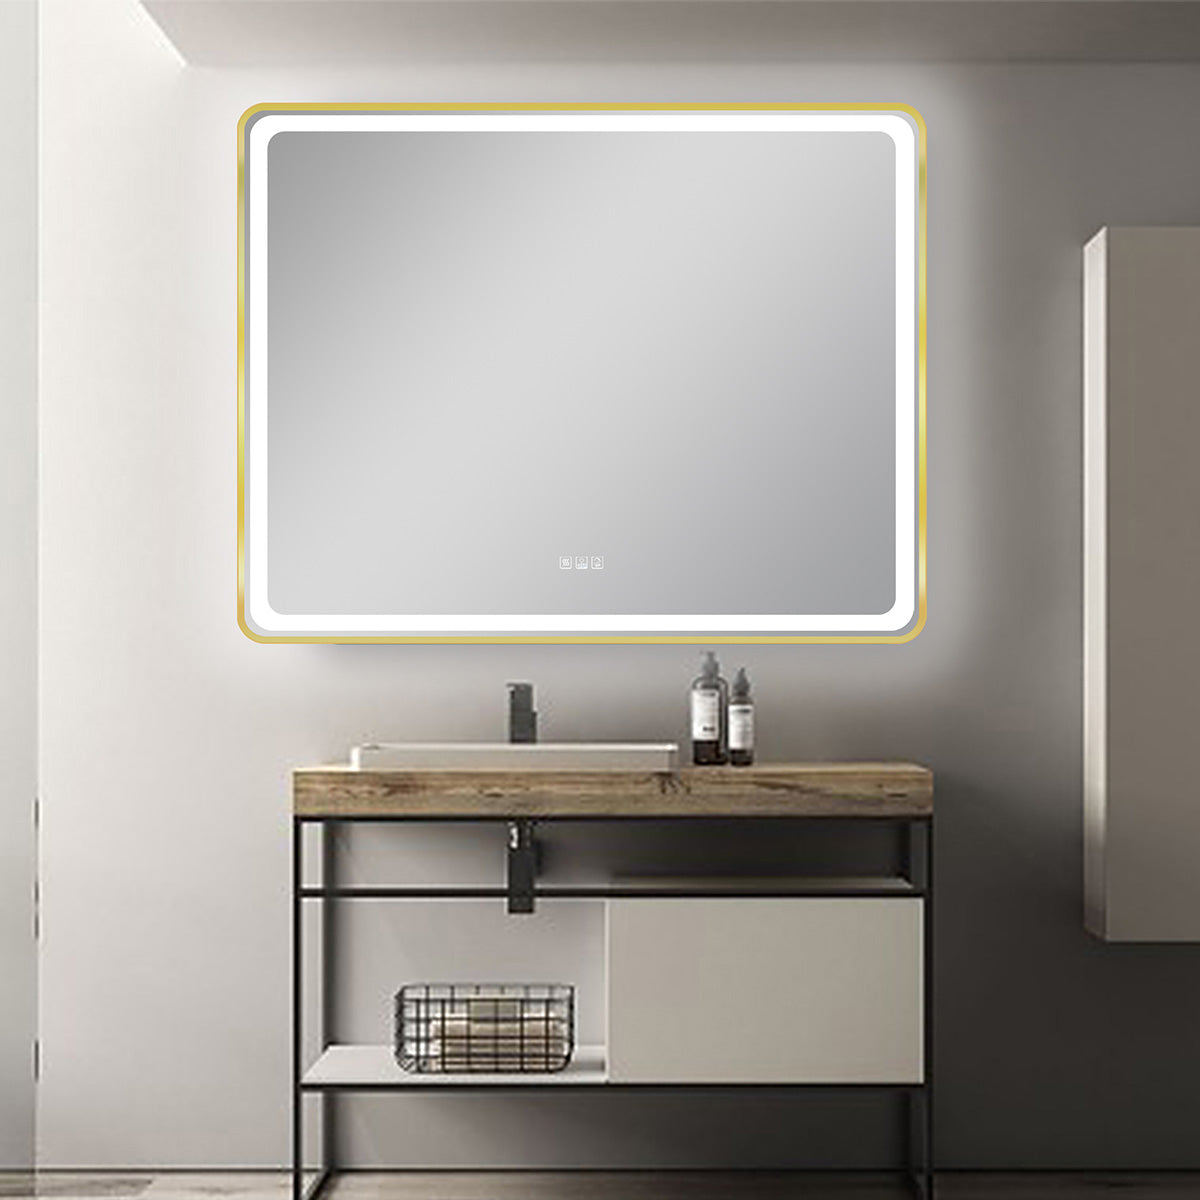 56" LED Mirror (Brushed Gold) Miles Series